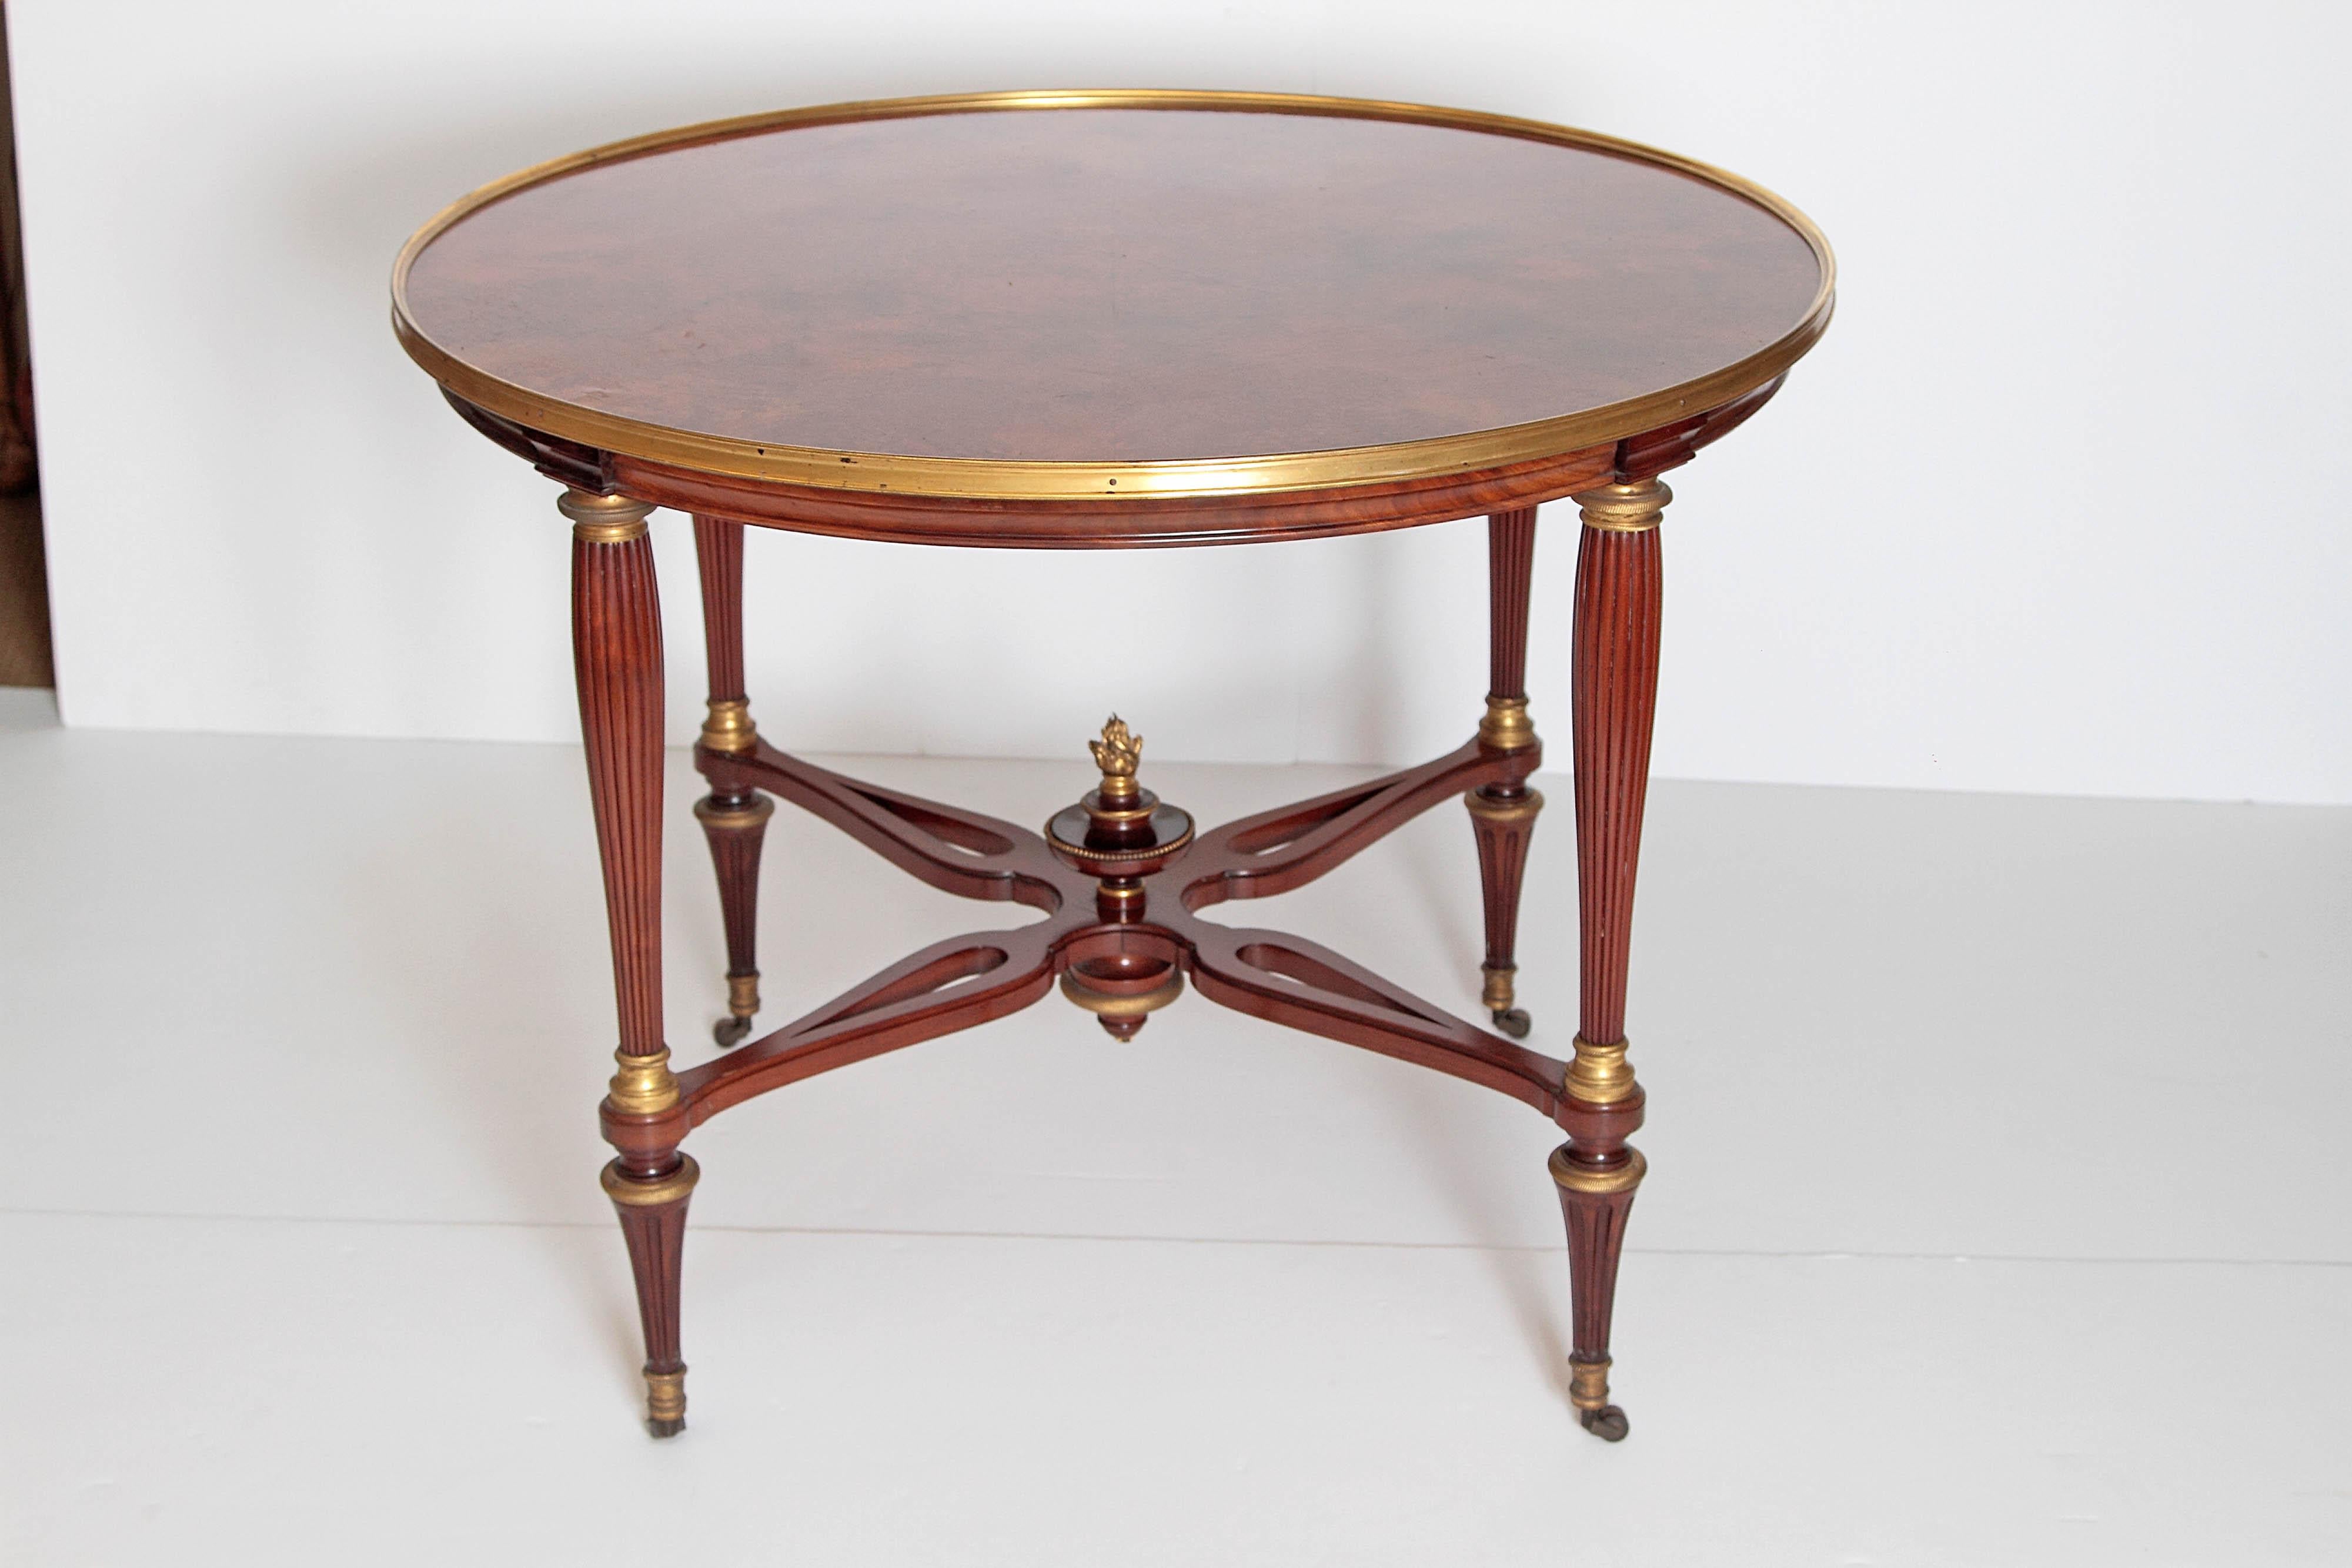 A Russian center table, neoclassical, with book-matched burled walnut top (laid out like pie pieces / triangular sections) with gilt bronze edge / border, beautifully turned / shaped and reeded legs with well defined joints, saltire stretcher with